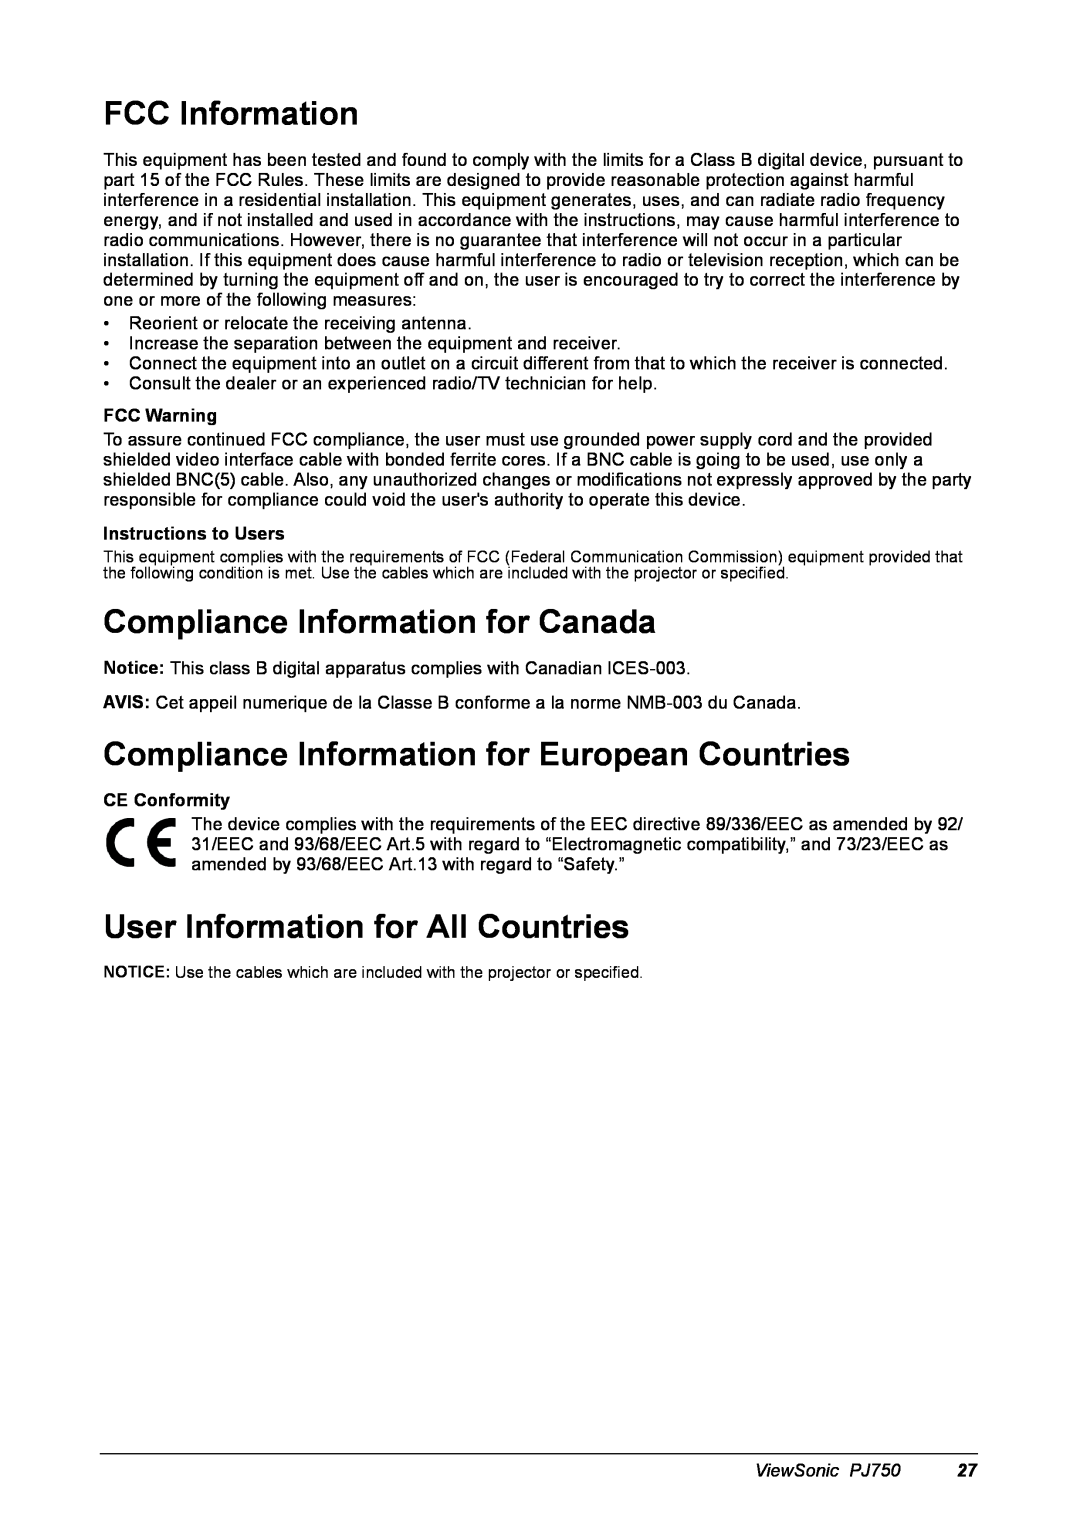 ViewSonic 300 manual FCC Information, Compliance Information for Canada, Compliance Information for European Countries 